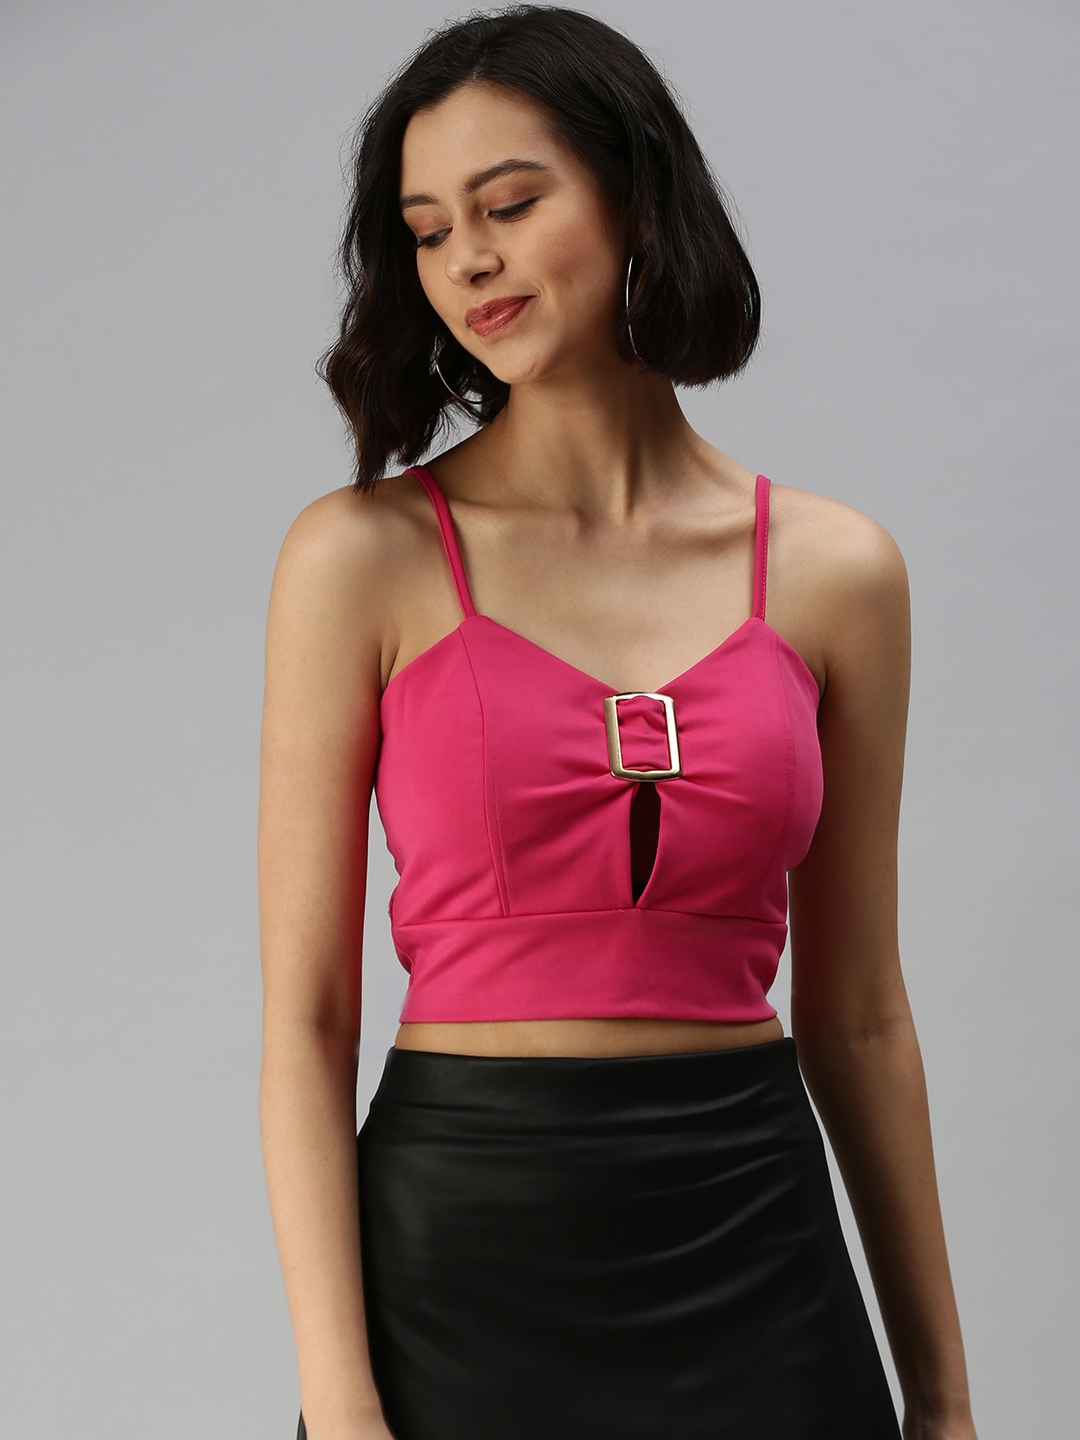 Women's Pink Polyester Solid Tops